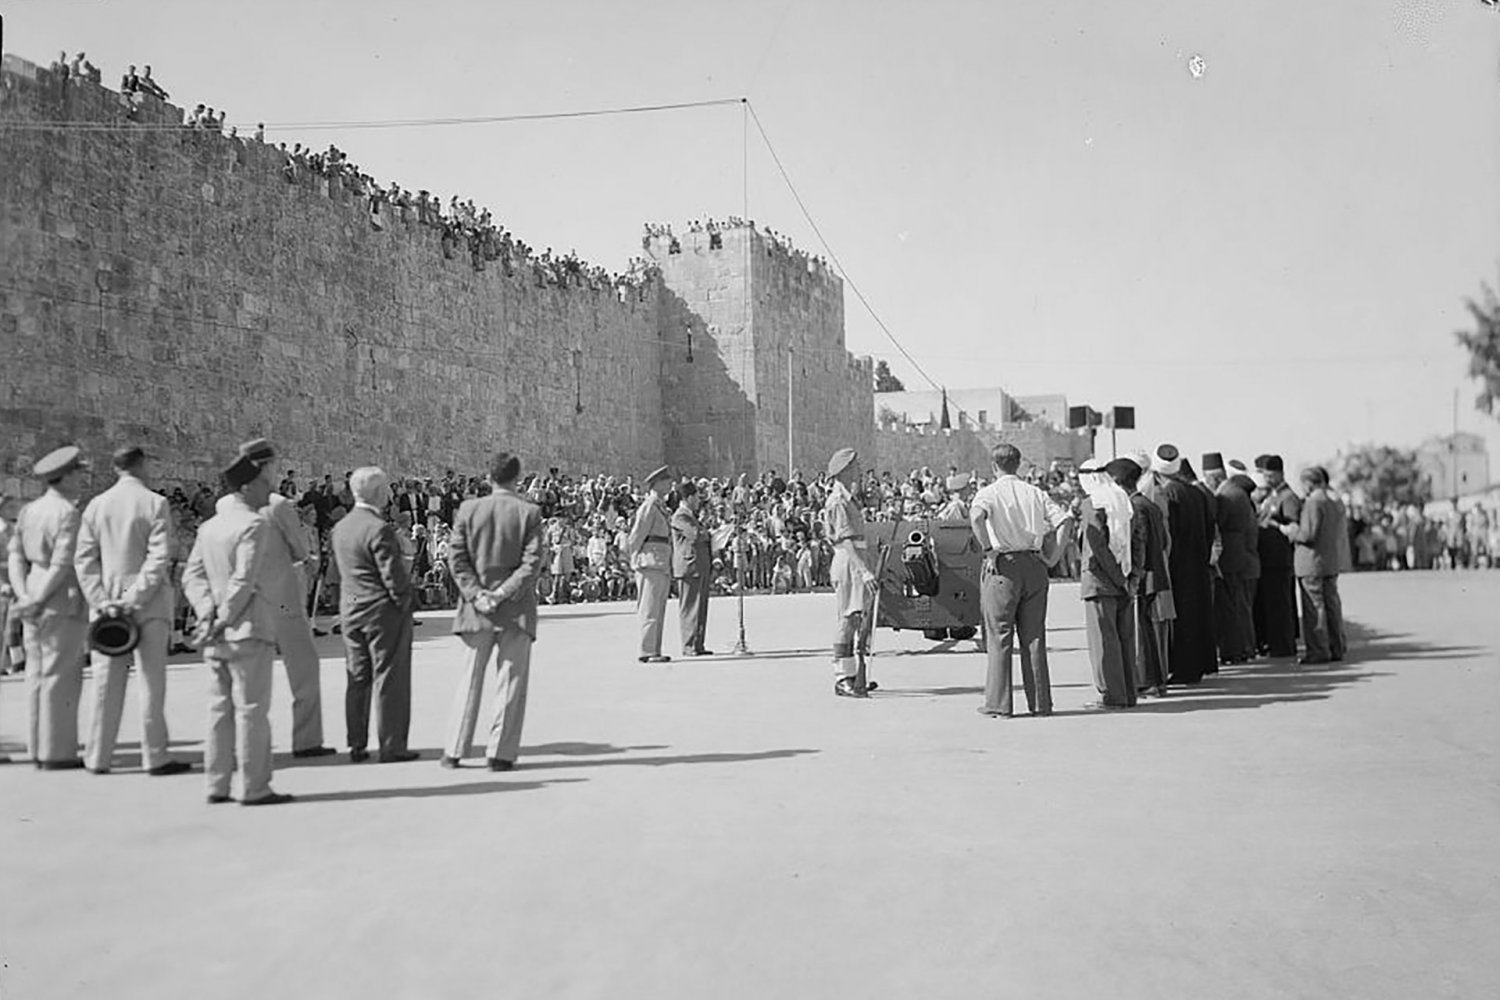 Presenting a Ramadan cannon to Muslims at Damascus Gate, 1945